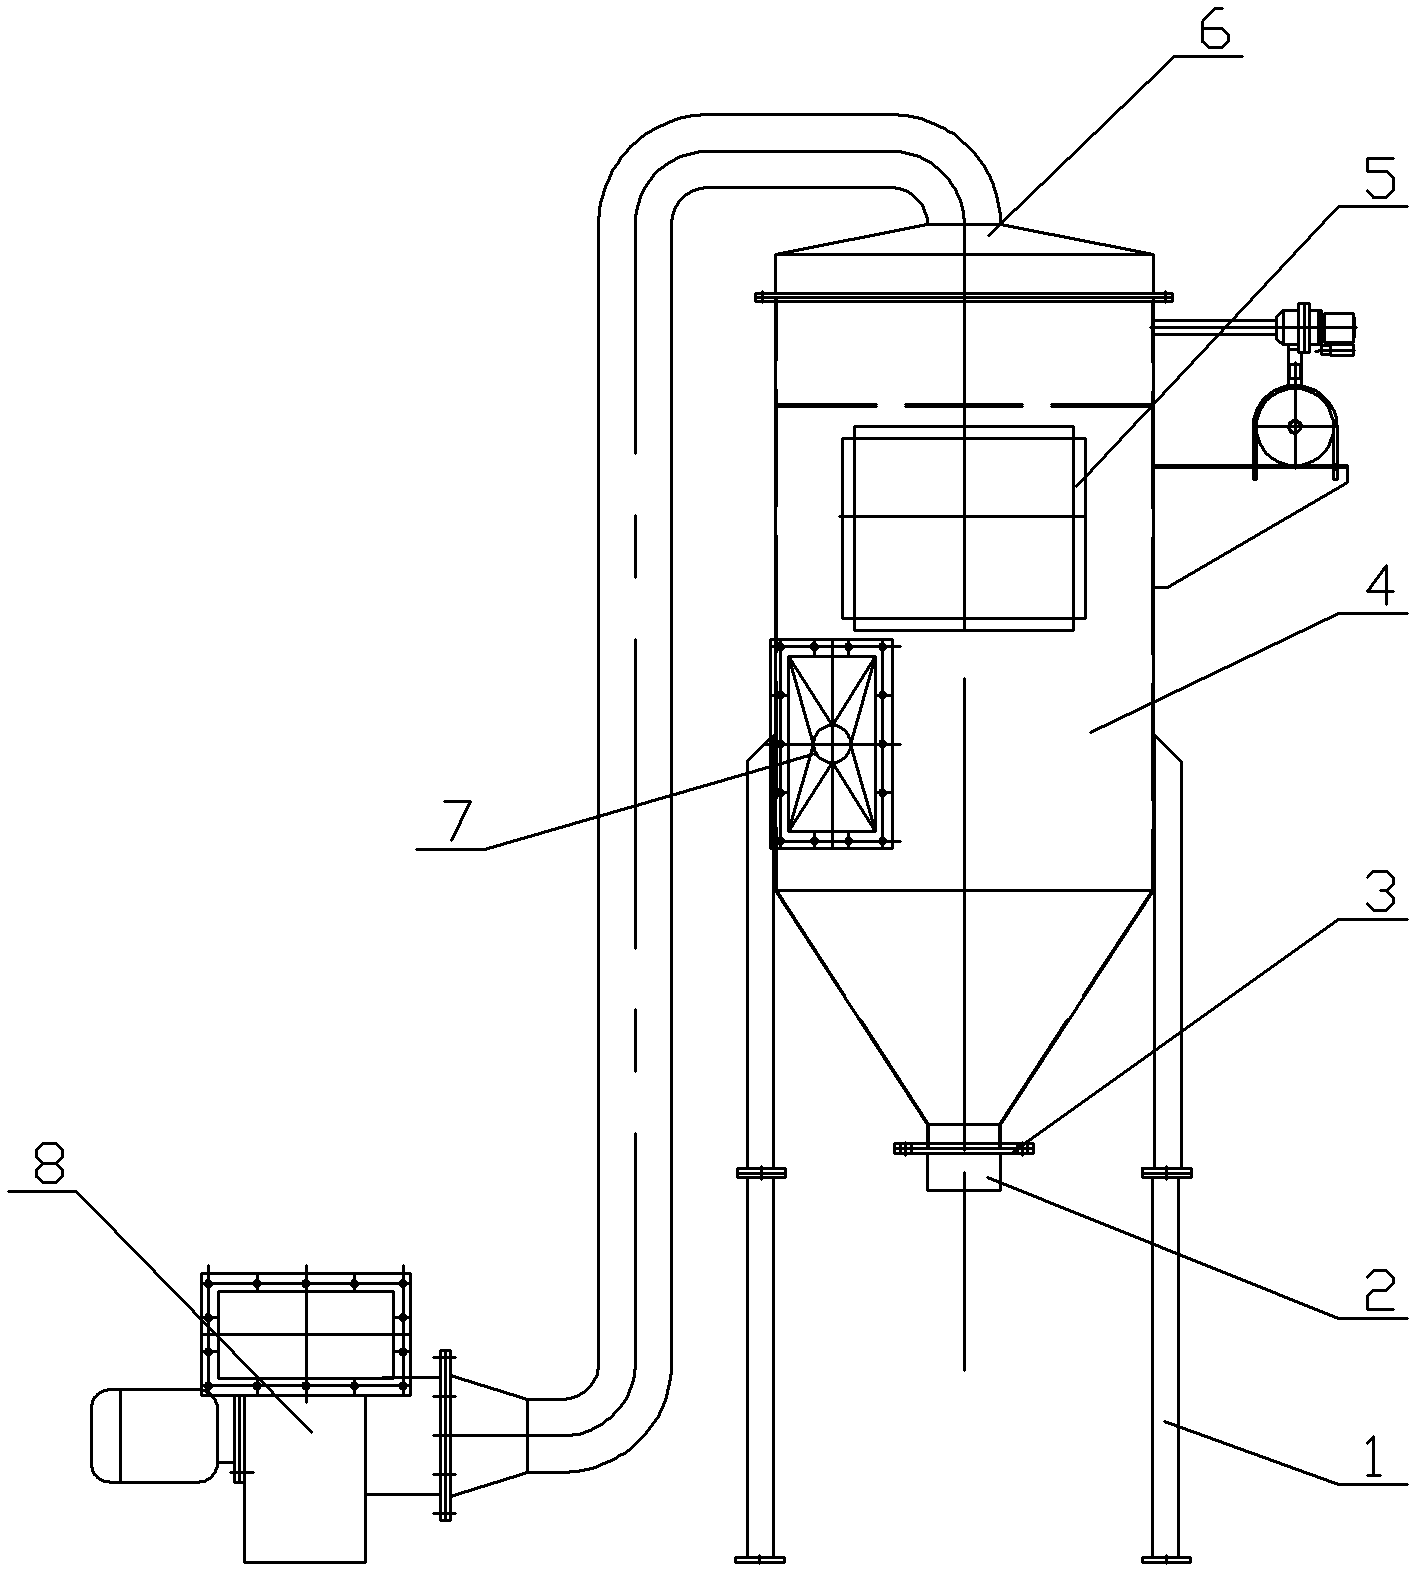 Cyclone dust collector